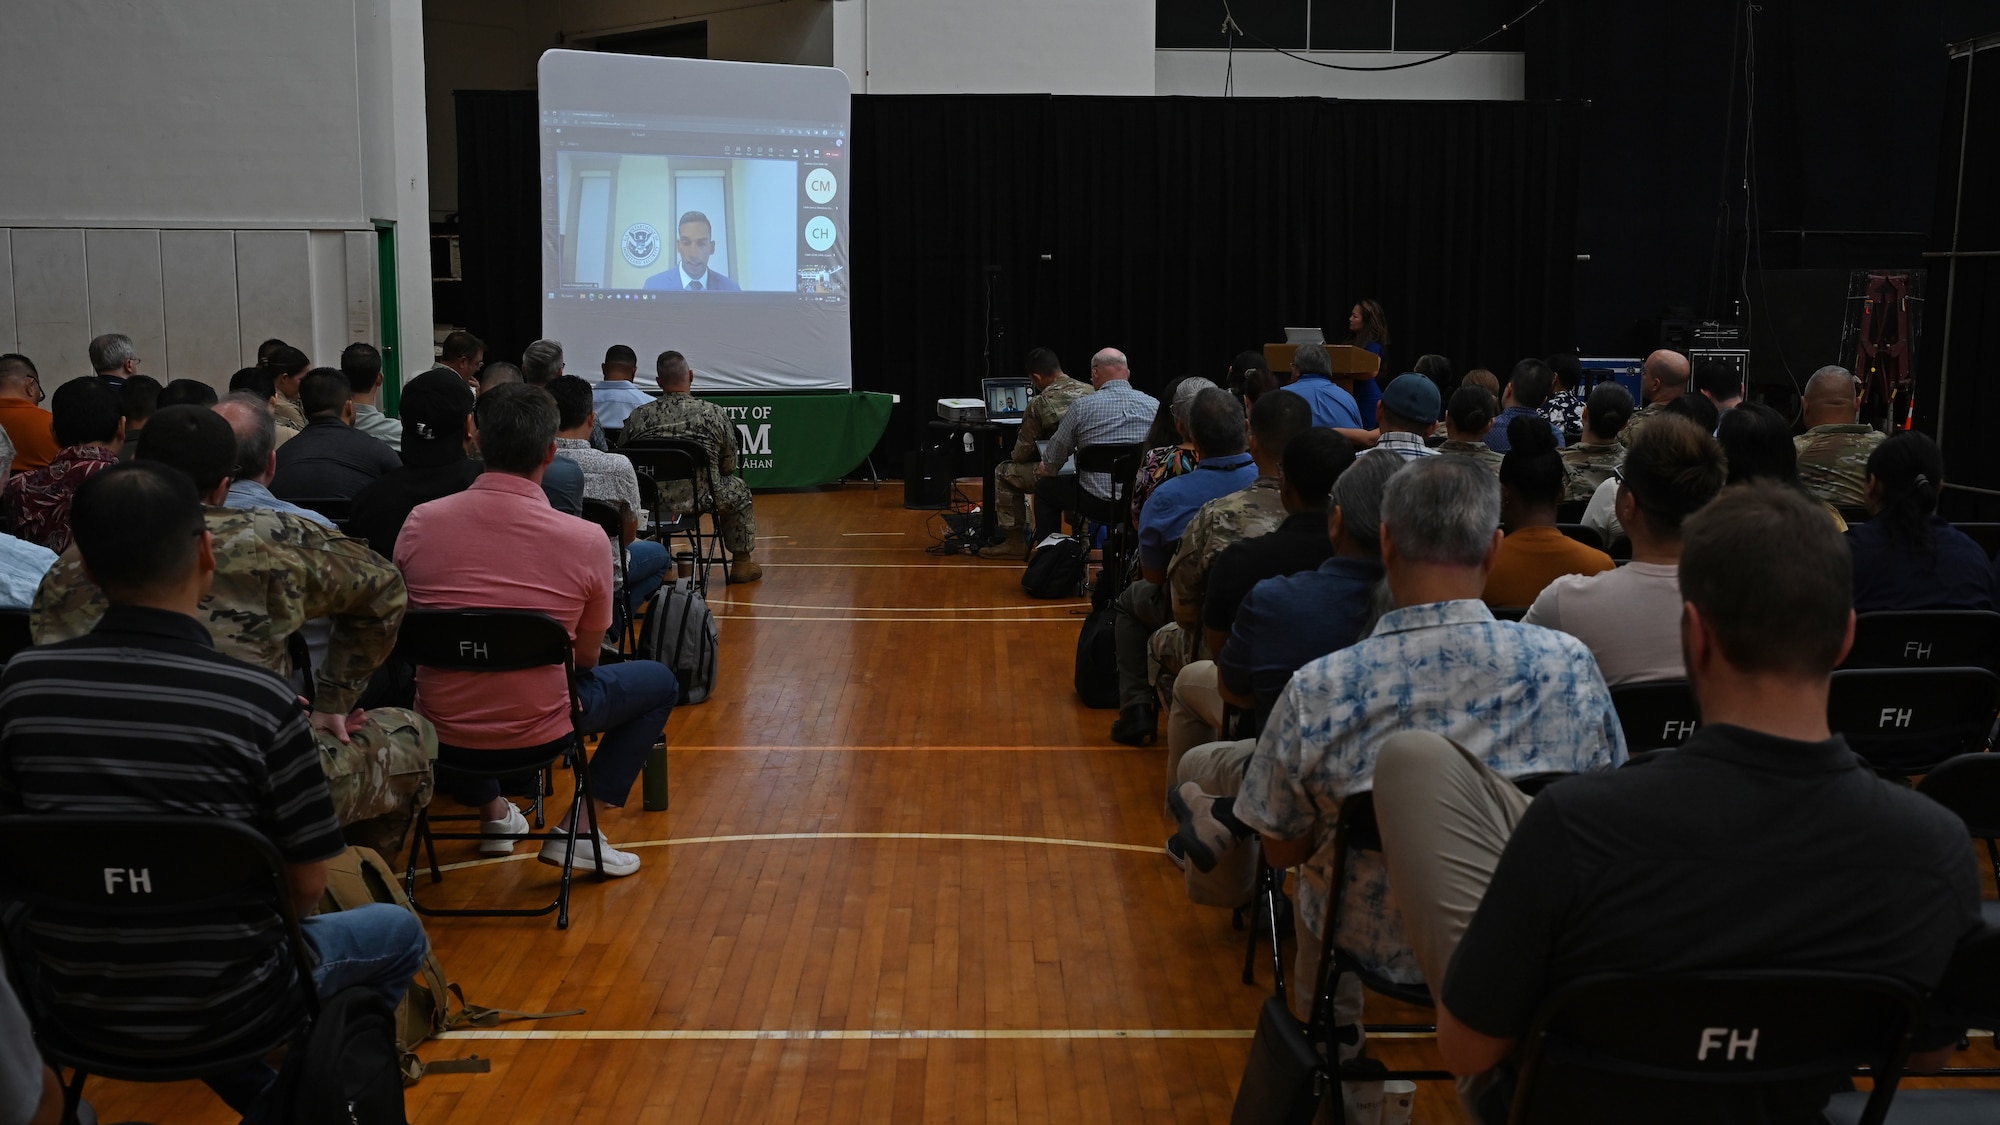 A group of civilians sit on chairs and listen to Iranga Kahangama, assistant secretary of Homeland Security, on the projector screen during the Central Pacific Cybersecurity Summit at the University of Guam.